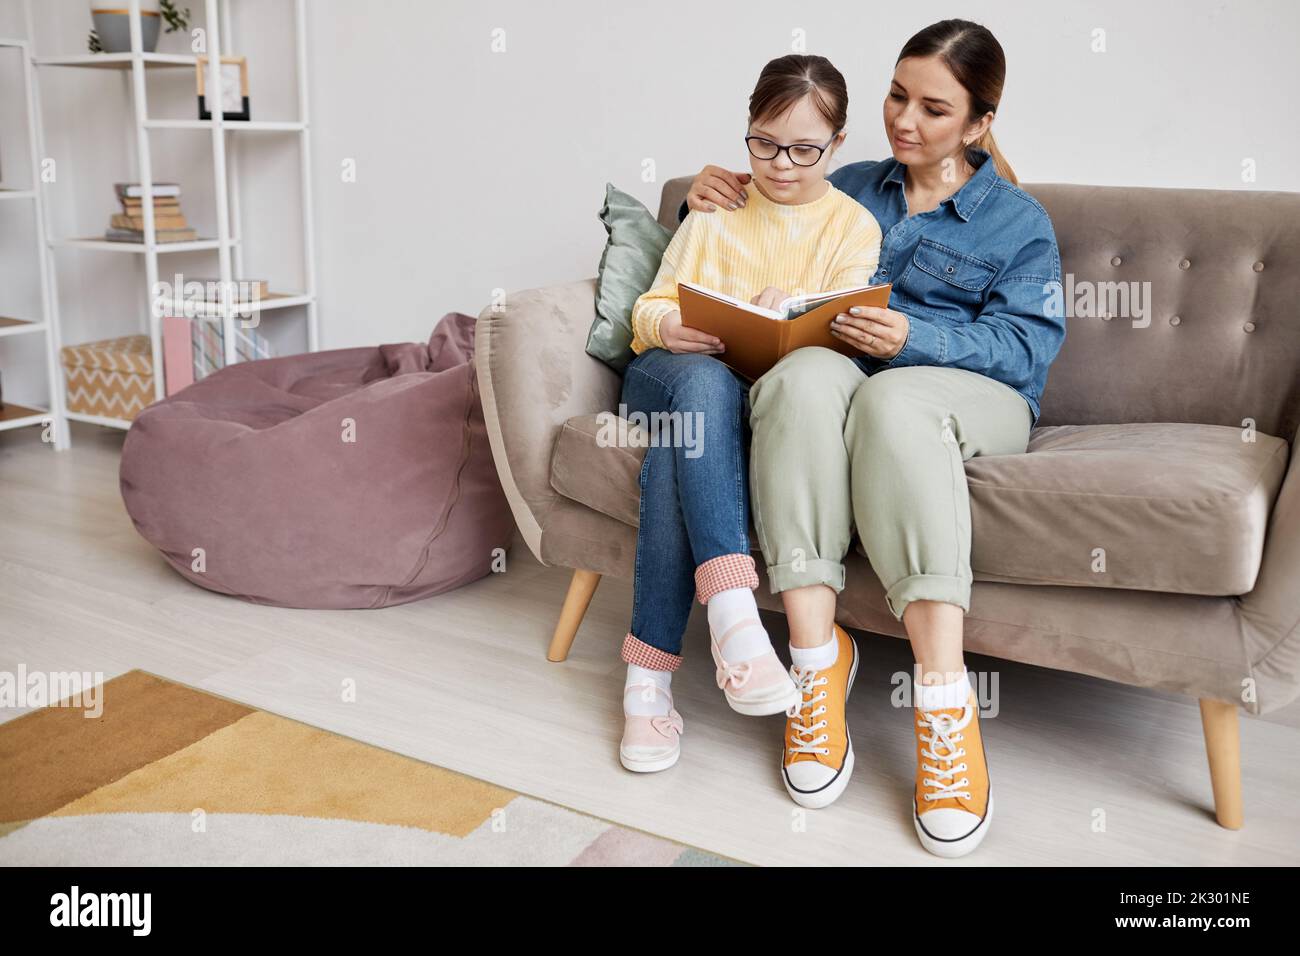 Full length portrait of teenage girl with Down syndrome reading book with loving mother at home Stock Photo